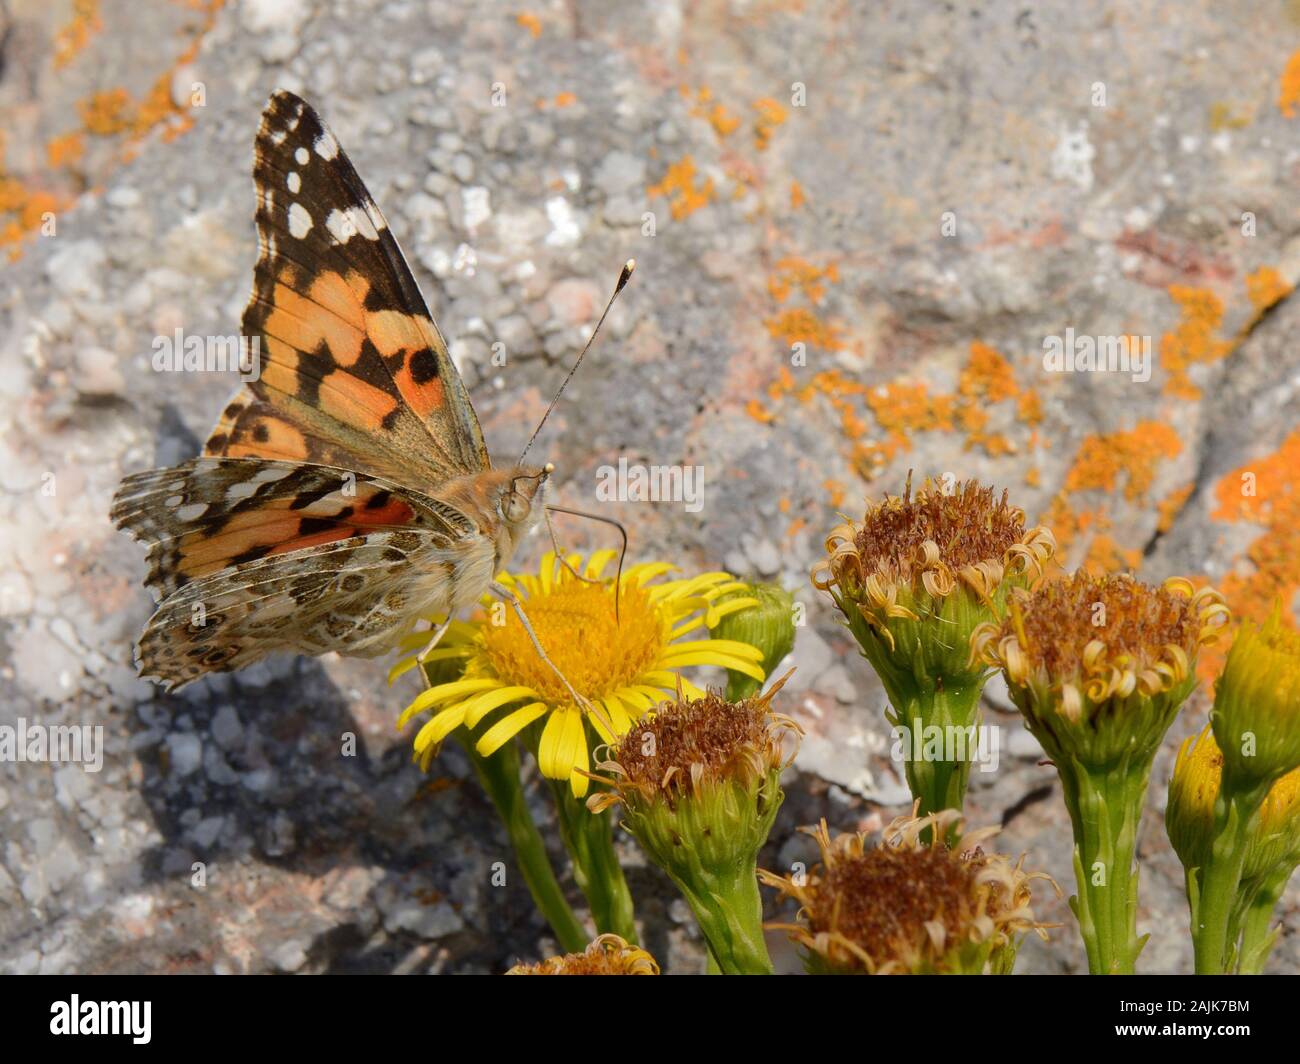 Painted lady butterfly (Vanessa cardui) nectaring on Golden samphire (Inula crithmoides) flower, by coastal rocks, The Gower, Wales, UK, August. Stock Photo